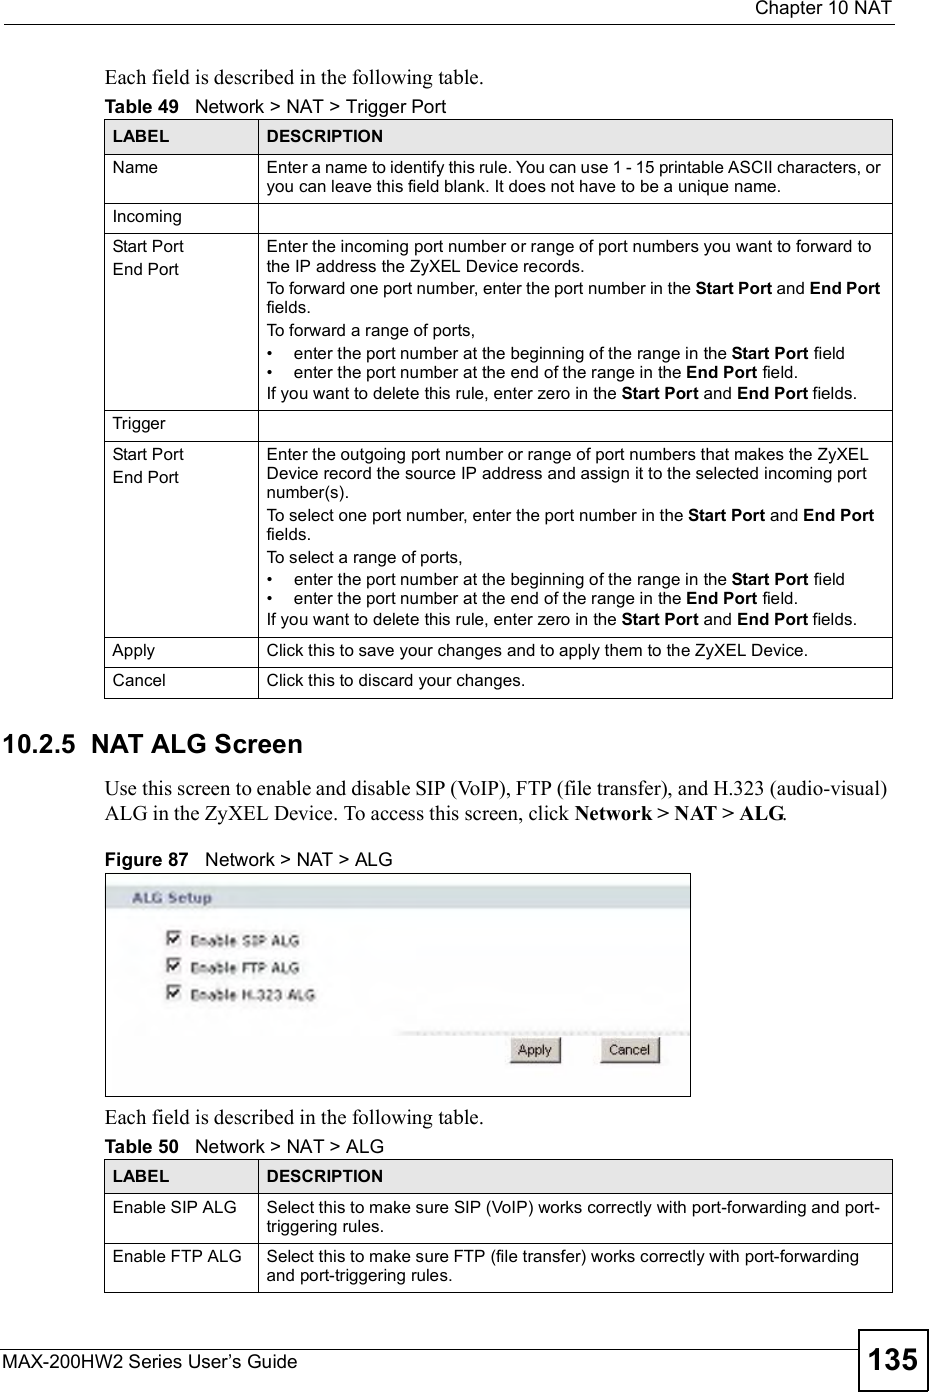  Chapter 10NATMAX-200HW2 Series User s Guide 135Each field is described in the following table.10.2.5  NAT ALG ScreenUse this screen to enable and disable SIP (VoIP), FTP (file transfer), and H.323 (audio-visual) ALG in the ZyXEL Device. To access this screen, click Network &gt; NAT &gt; ALG.Figure 87   Network &gt; NAT &gt; ALGEach field is described in the following table.Table 49   Network &gt; NAT &gt; Trigger PortLABEL DESCRIPTIONName Enter a name to identify this rule. You can use 1 - 15 printable ASCII characters, or you can leave this field blank. It does not have to be a unique name.IncomingStart PortEnd PortEnter the incoming port number or range of port numbers you want to forward to the IP address the ZyXEL Device records.To forward one port number, enter the port number in the Start Port and End Portfields.To forward a range of ports,#enter the port number at the beginning of the range in the Start Port field#enter the port number at the end of the range in the End Port field.If you want to delete this rule, enter zero in the Start Port and End Port fields.TriggerStart PortEnd PortEnter the outgoing port number or range of port numbers that makes the ZyXEL Device record the source IP address and assign it to the selected incoming port number(s).To select one port number, enter the port number in the Start Port and End Portfields.To select a range of ports,#enter the port number at the beginning of the range in the Start Port field#enter the port number at the end of the range in the End Port field.If you want to delete this rule, enter zero in the Start Port and End Port fields.Apply Click this to save your changes and to apply them to the ZyXEL Device.Cancel Click this to discard your changes.Table 50   Network &gt; NAT &gt; ALGLABEL DESCRIPTIONEnable SIP ALG Select this to make sure SIP (VoIP) works correctly with port-forwarding and port-triggering rules.Enable FTP ALG Select this to make sure FTP (file transfer) works correctly with port-forwarding and port-triggering rules.